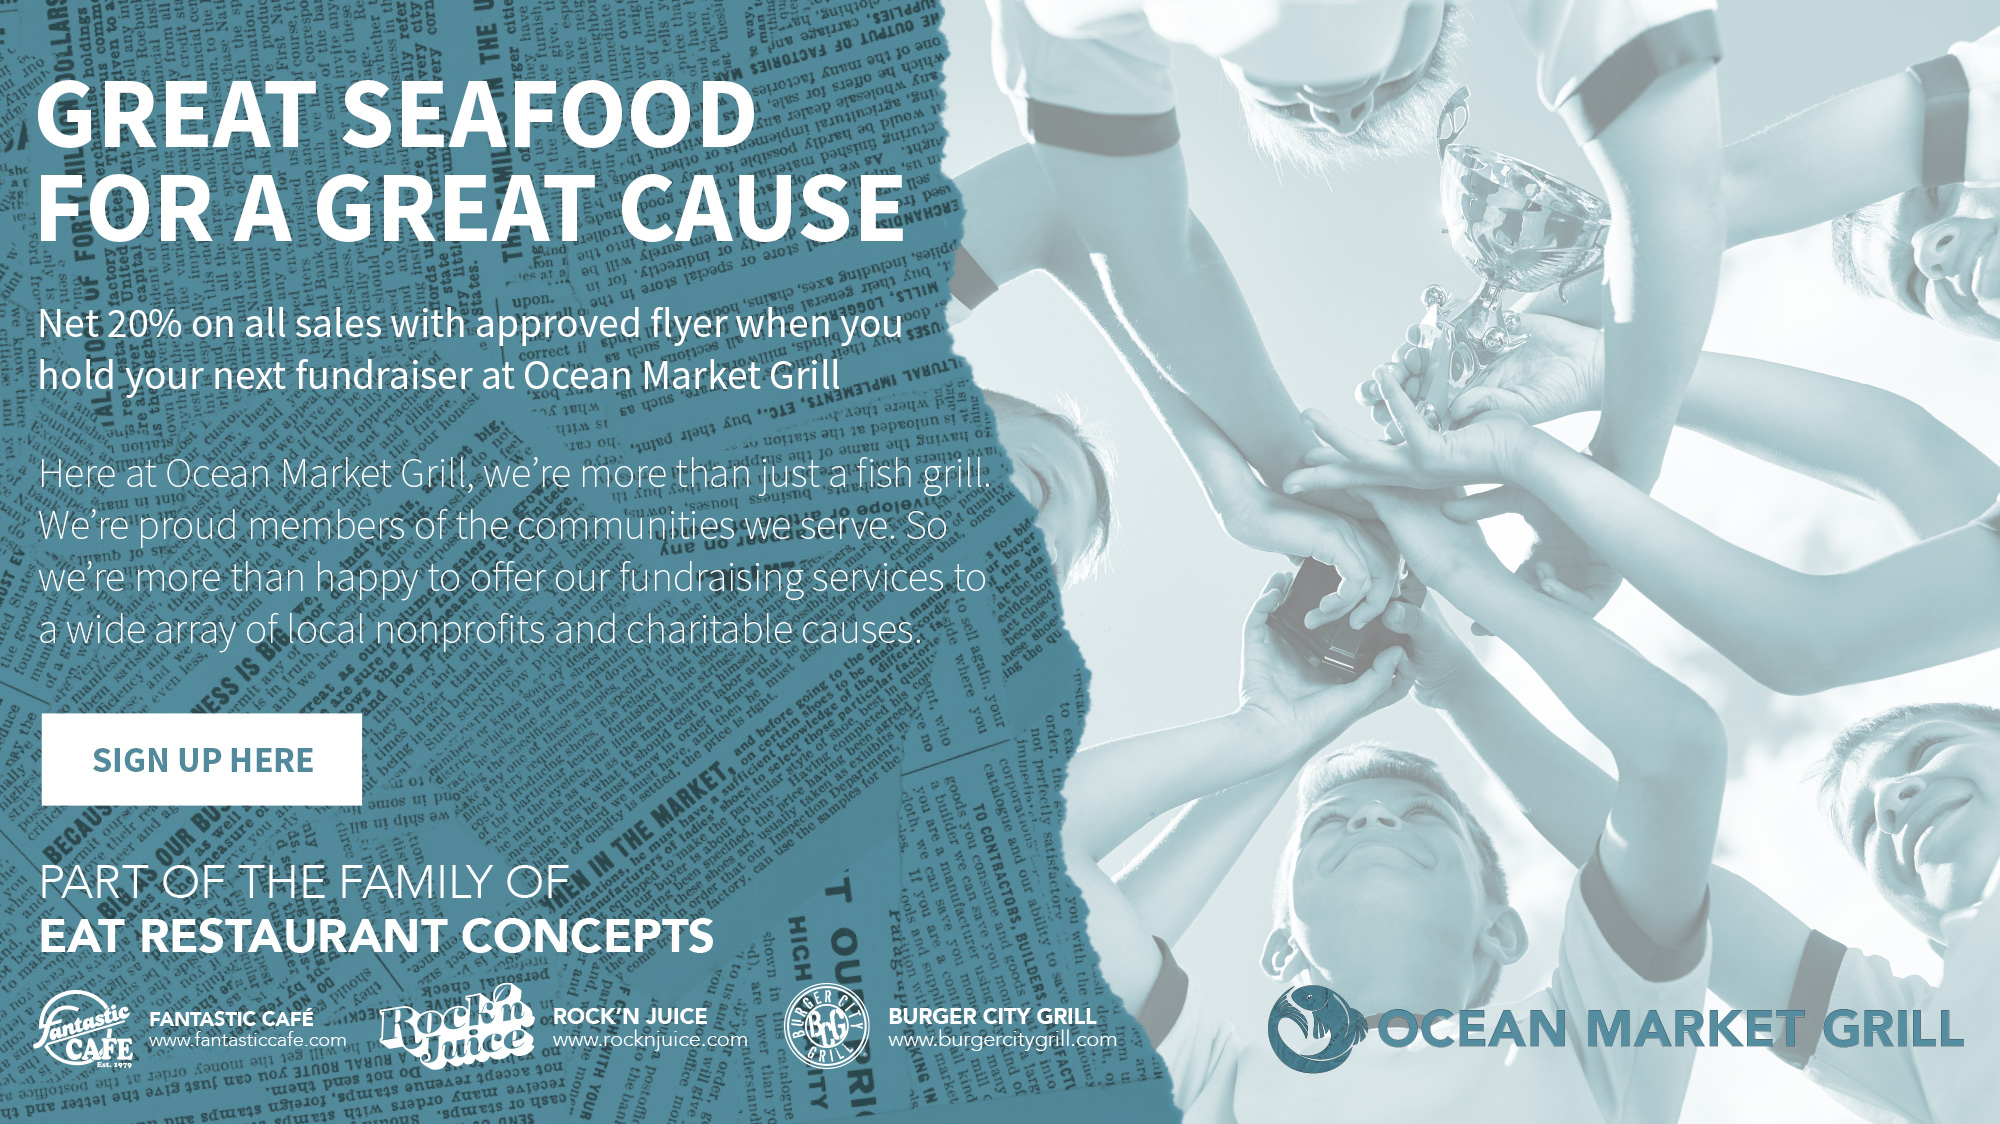 Great Seafood for a Great Cause! Net 20% on all sales with approved flyer when you hold your next fundraiser at Ocean Market Grill